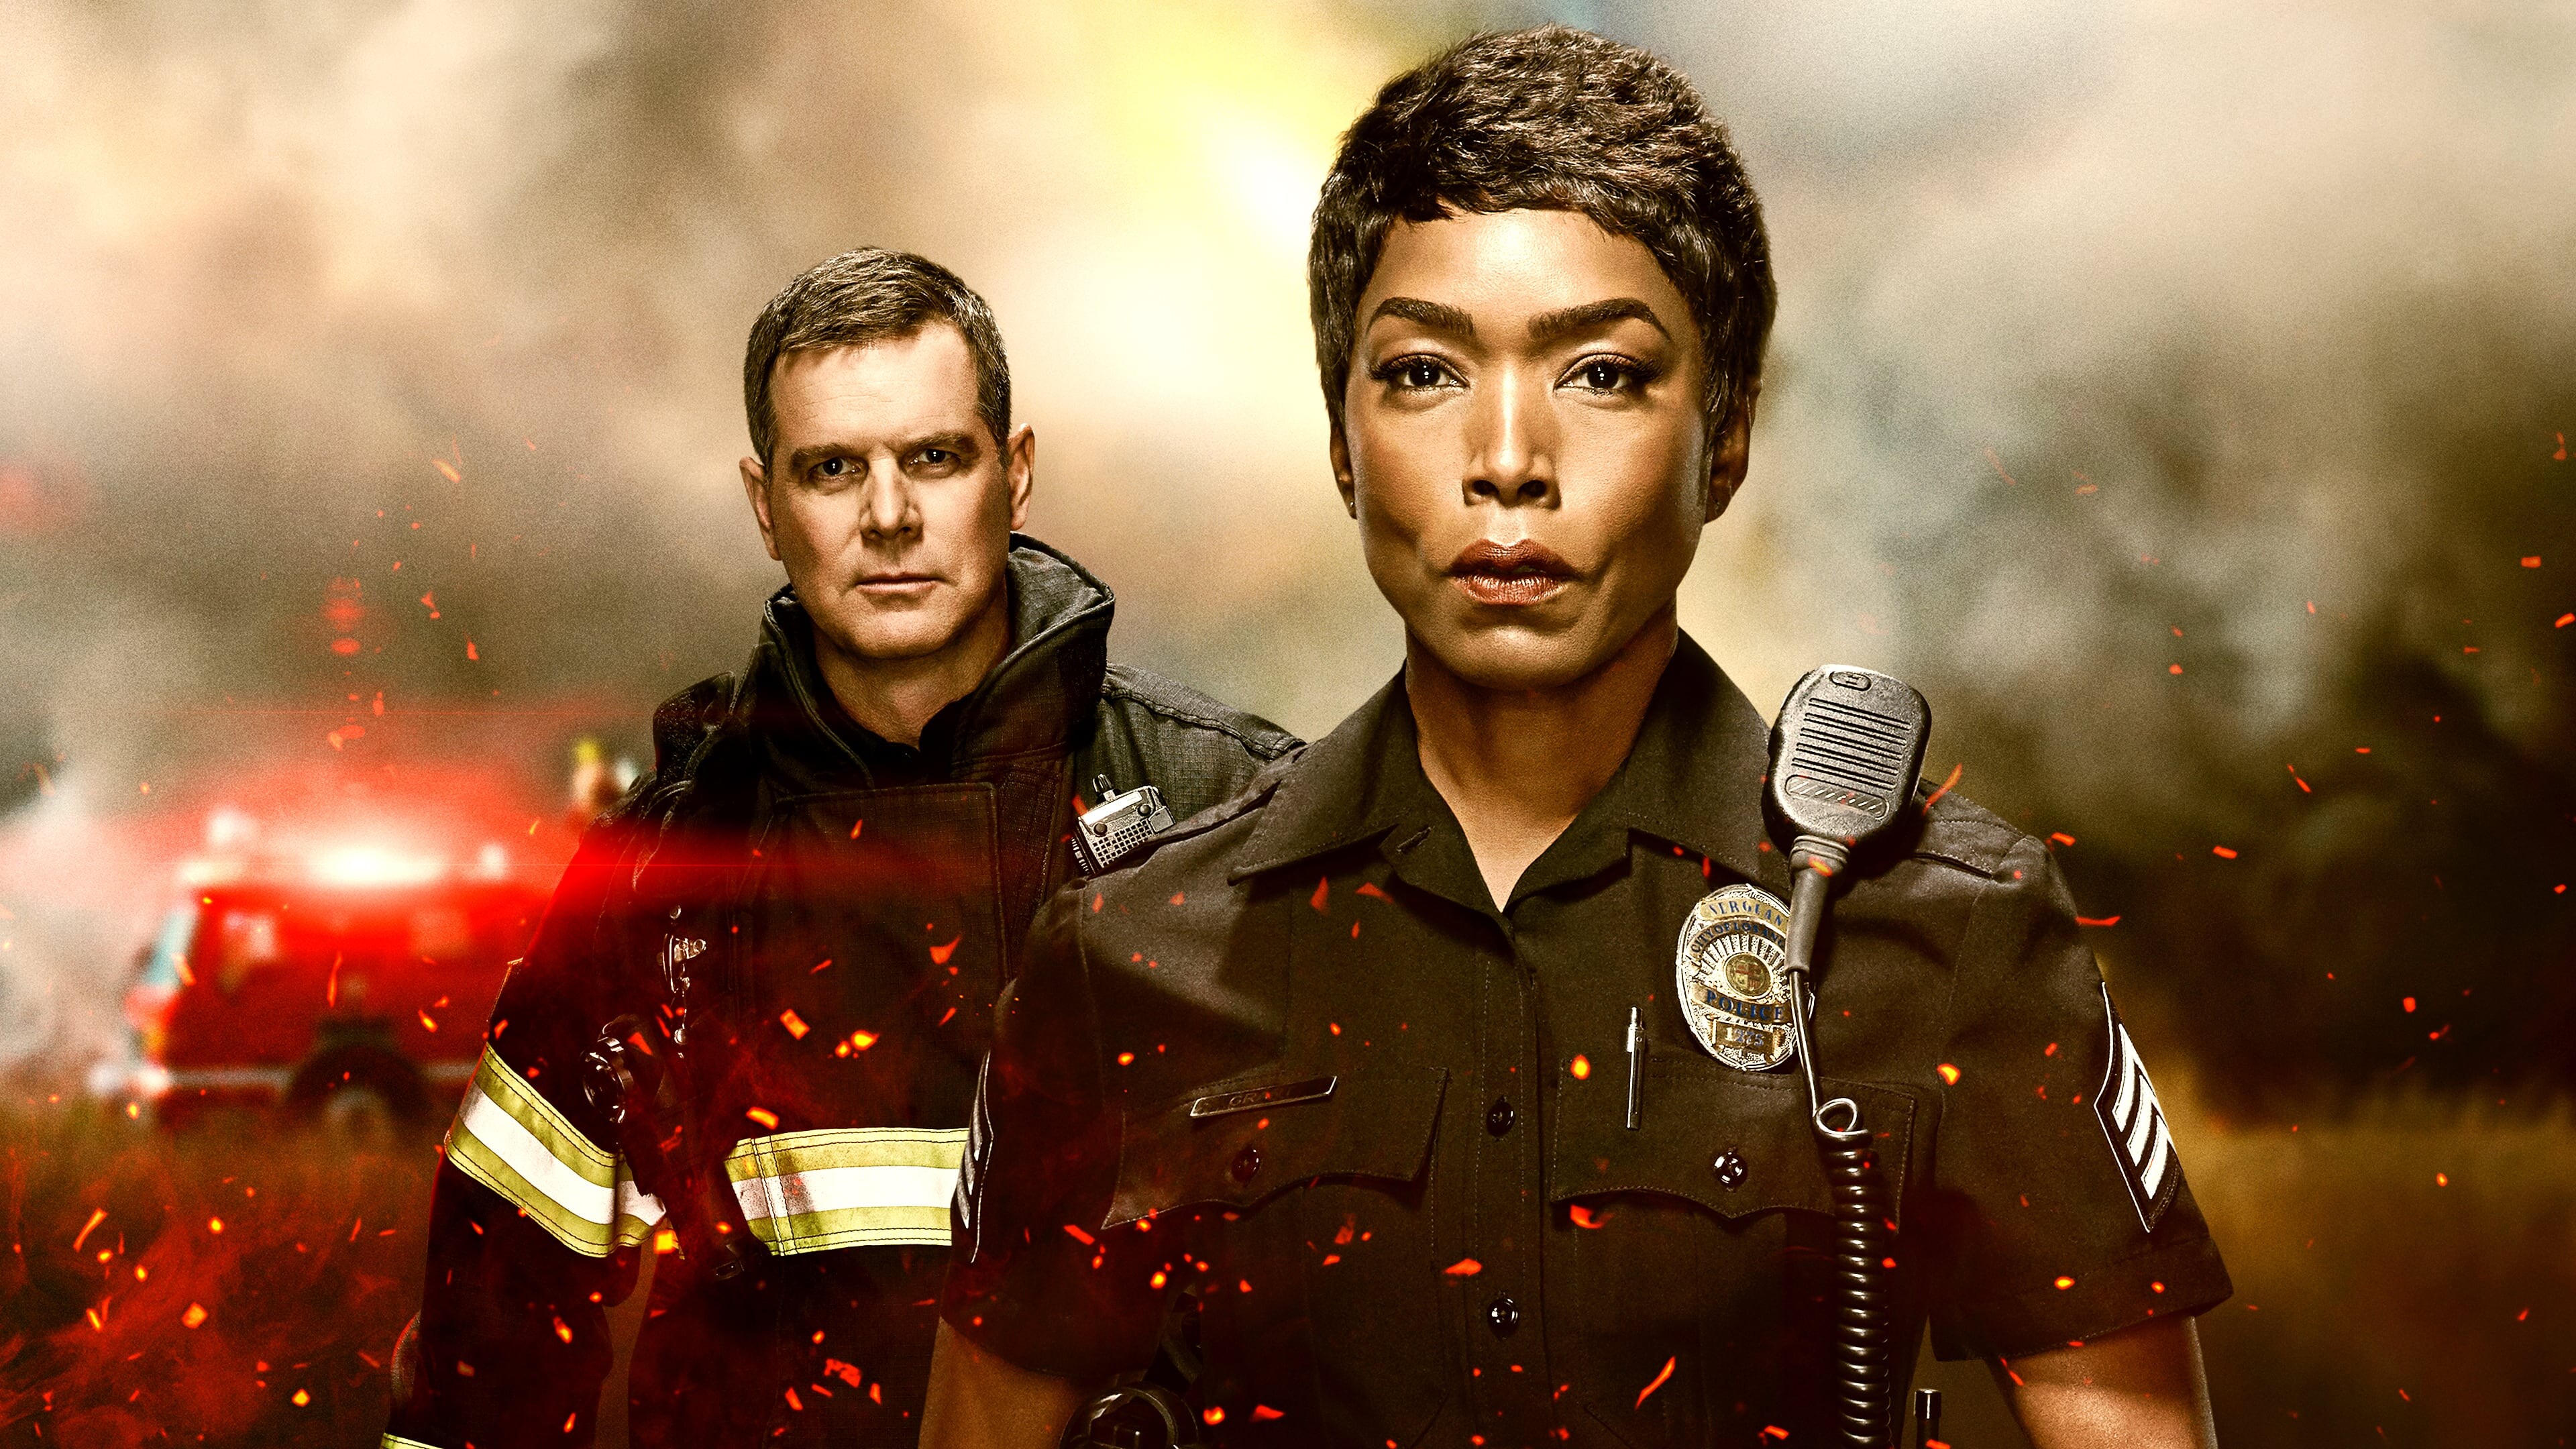 9-1-1 (TV Series): Season 5, Fire And Police Departments Of Los Angeles, Athena Grant, Bobby Nash. 3840x2160 4K Wallpaper.